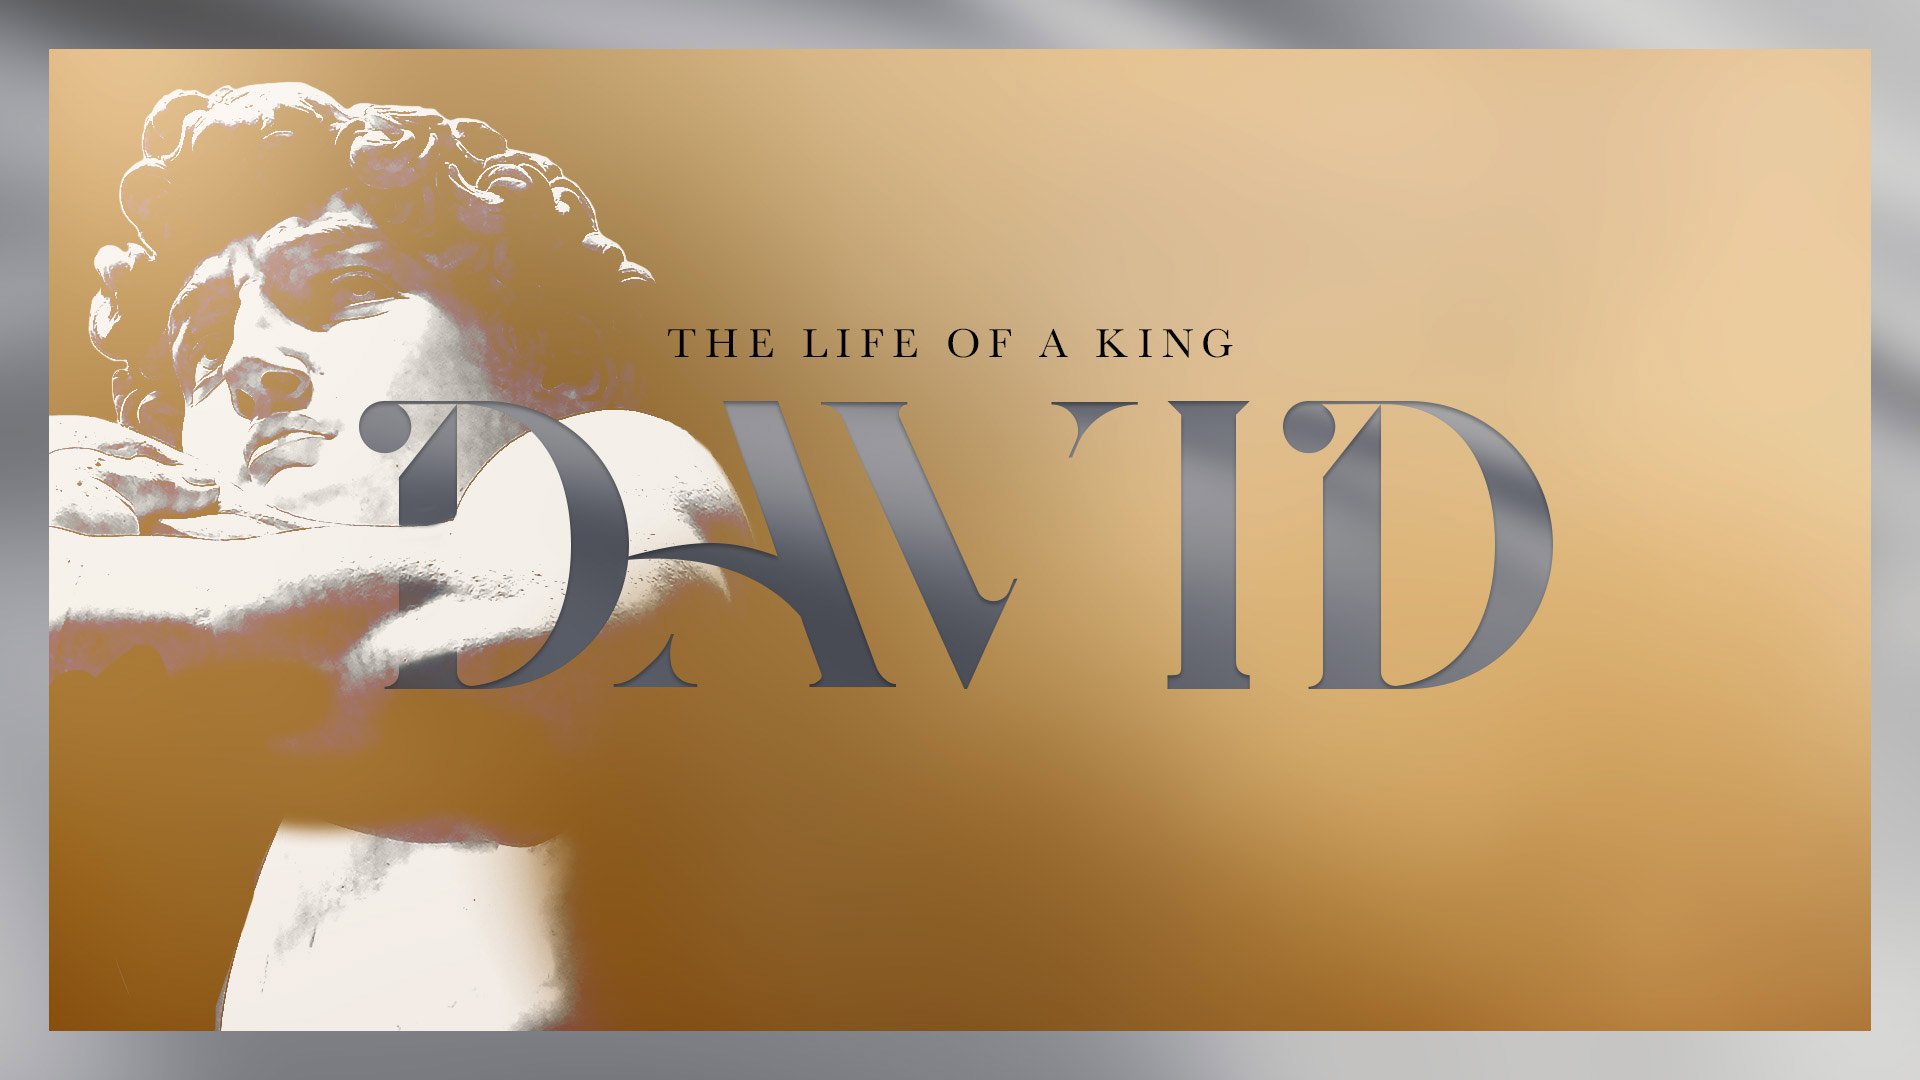 David - The Life of a King